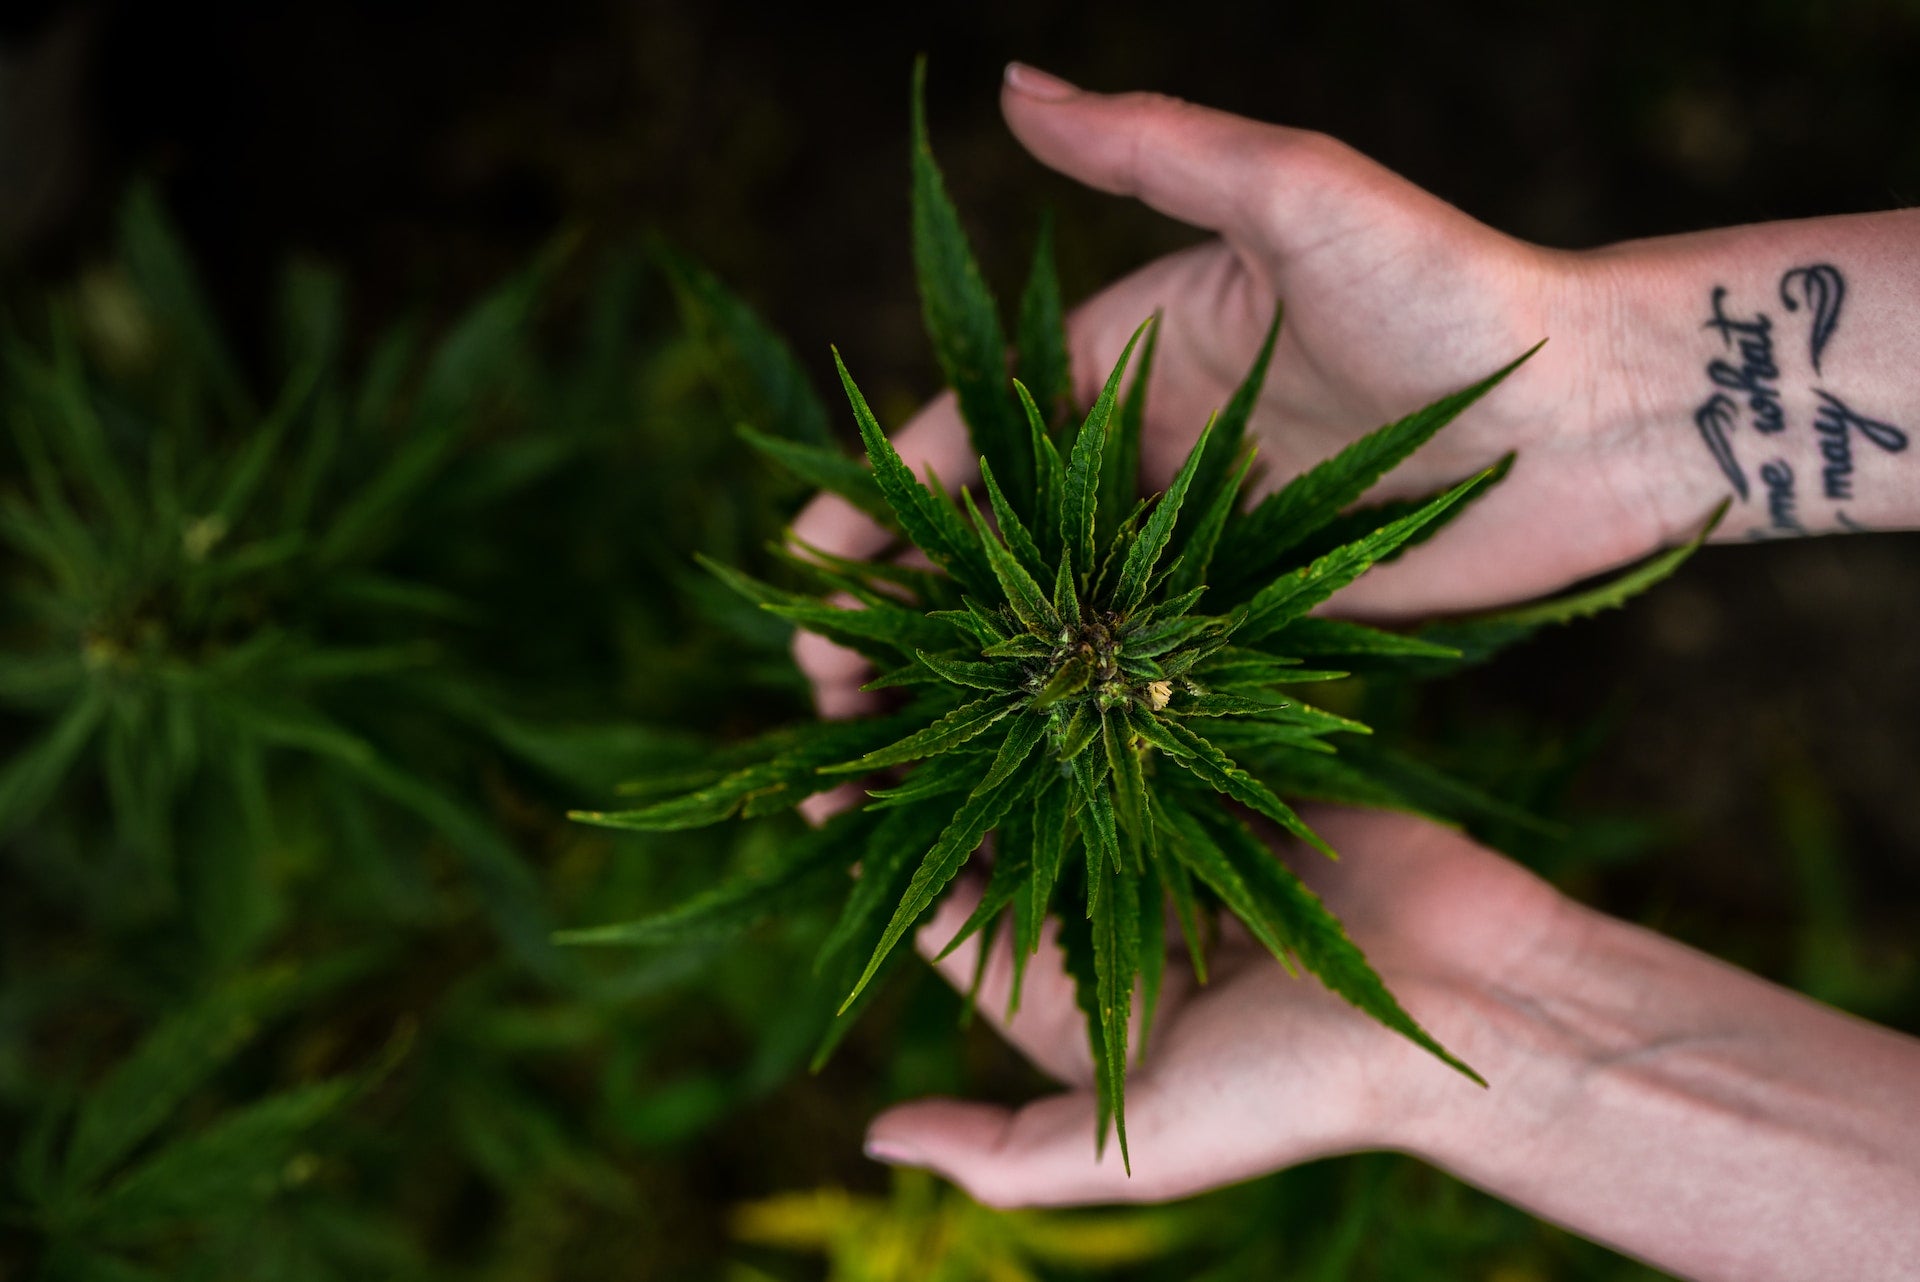 Male hand holding up cannabis plant grown by fimming.